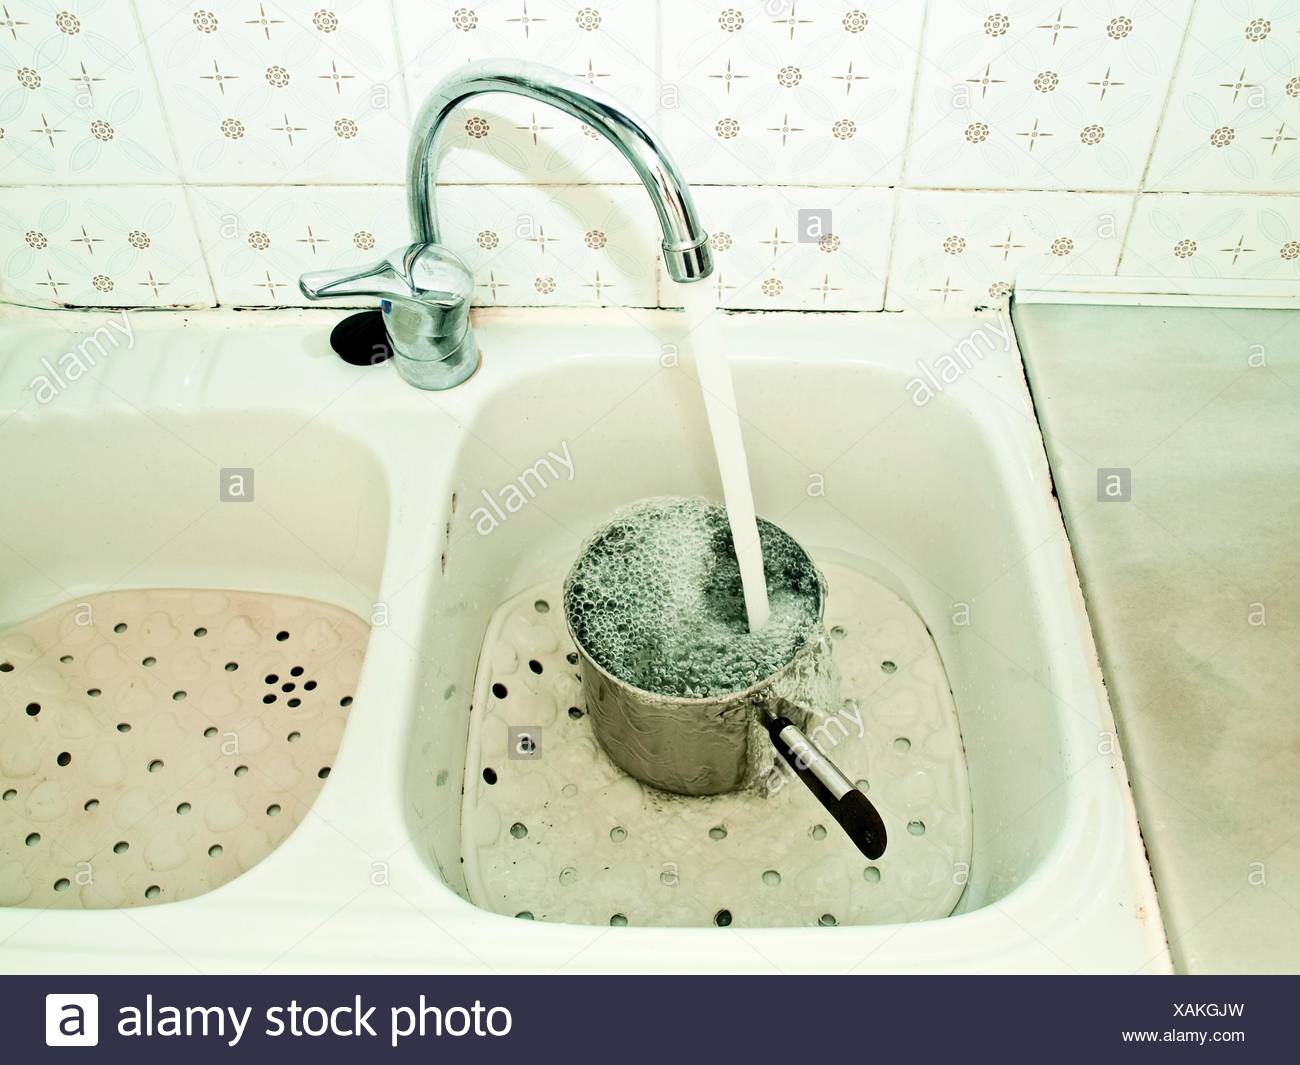 Kitchen Sink Water Overflowing From A Pot Stock Photo